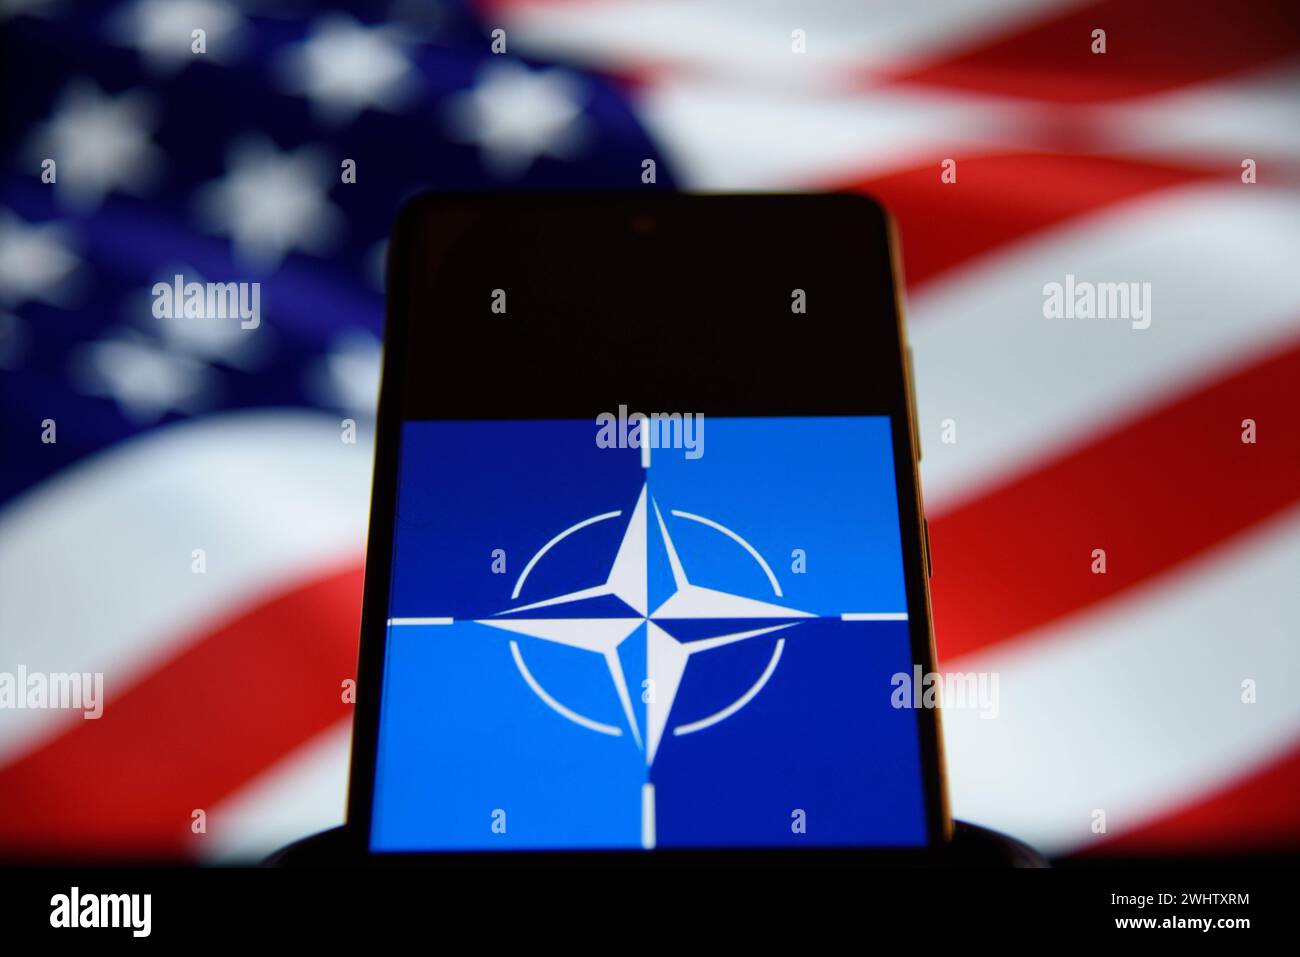 U.S.A and NATO Illustrations. NATO logo and the United States of America flag are displayed on screens on February 11, 2024 in Warsaw, Poland. Warsaw Poland Copyright: xAleksanderxKalkax Stock Photo